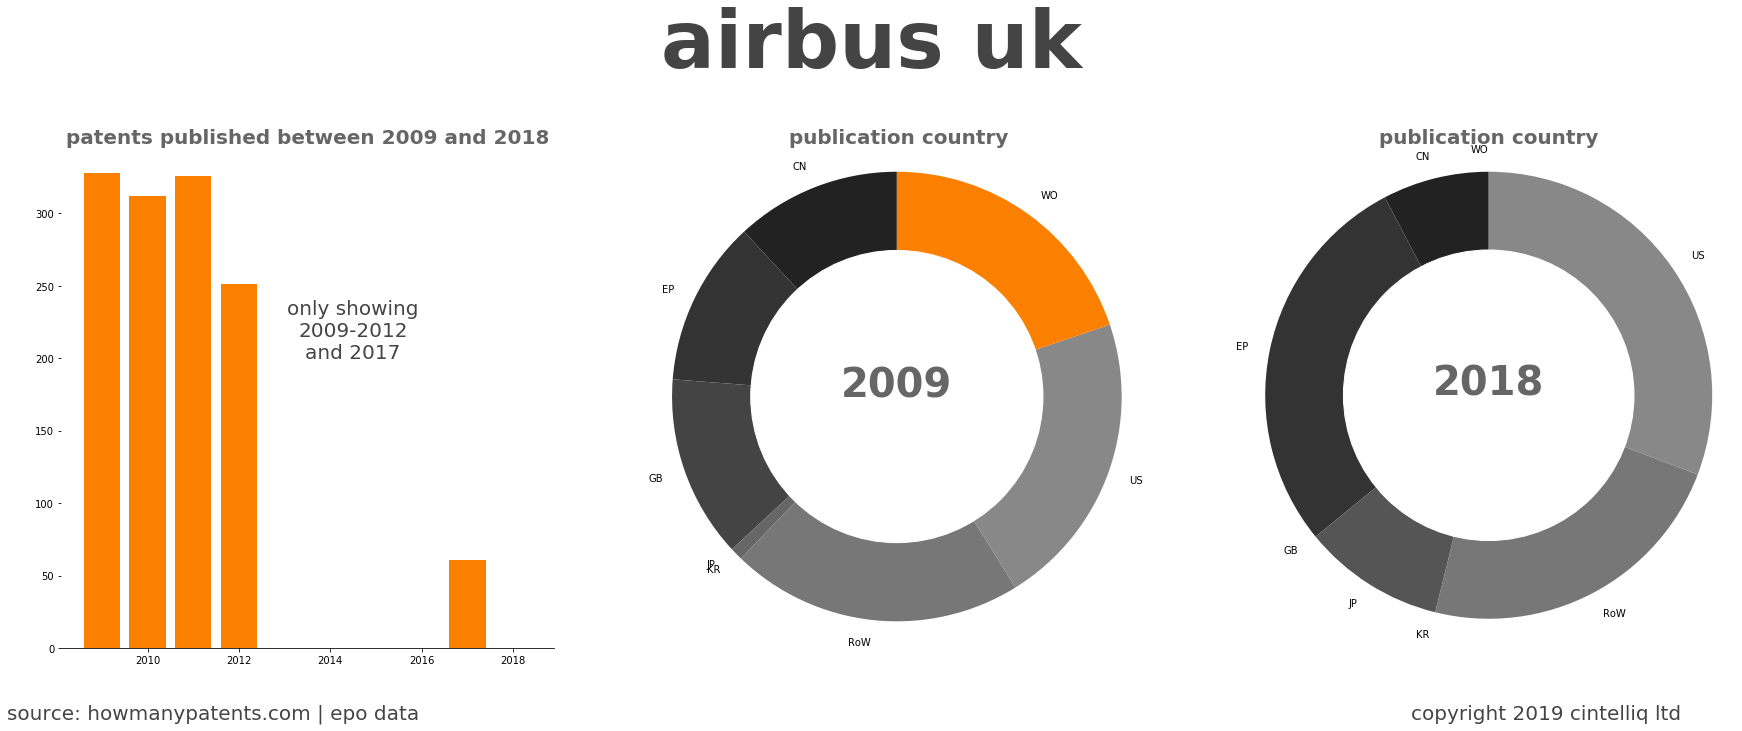 summary of patents for Airbus Uk